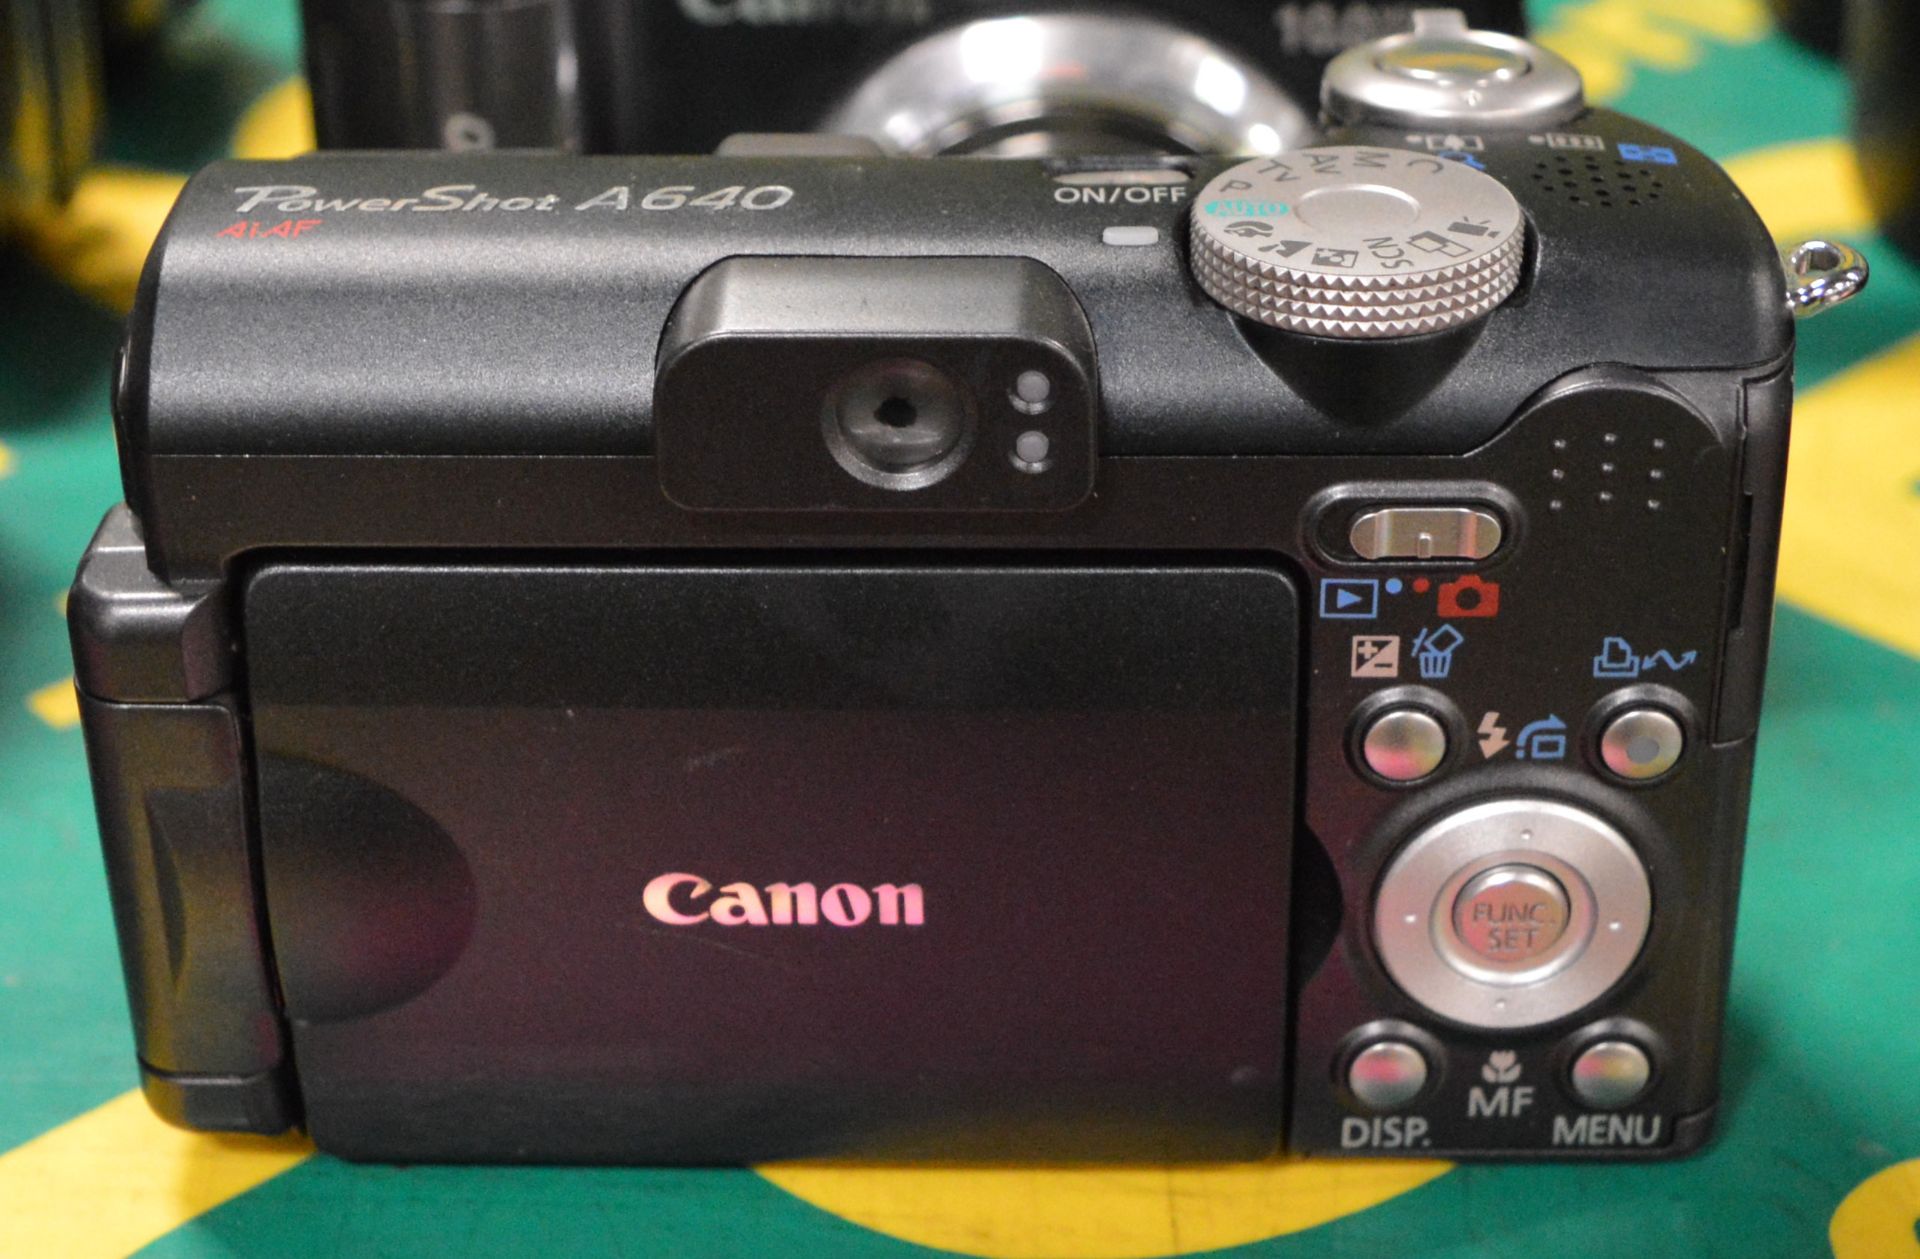 4x Canon PowerShot A640 Digital Cameras - Tested & Working. - Image 2 of 2